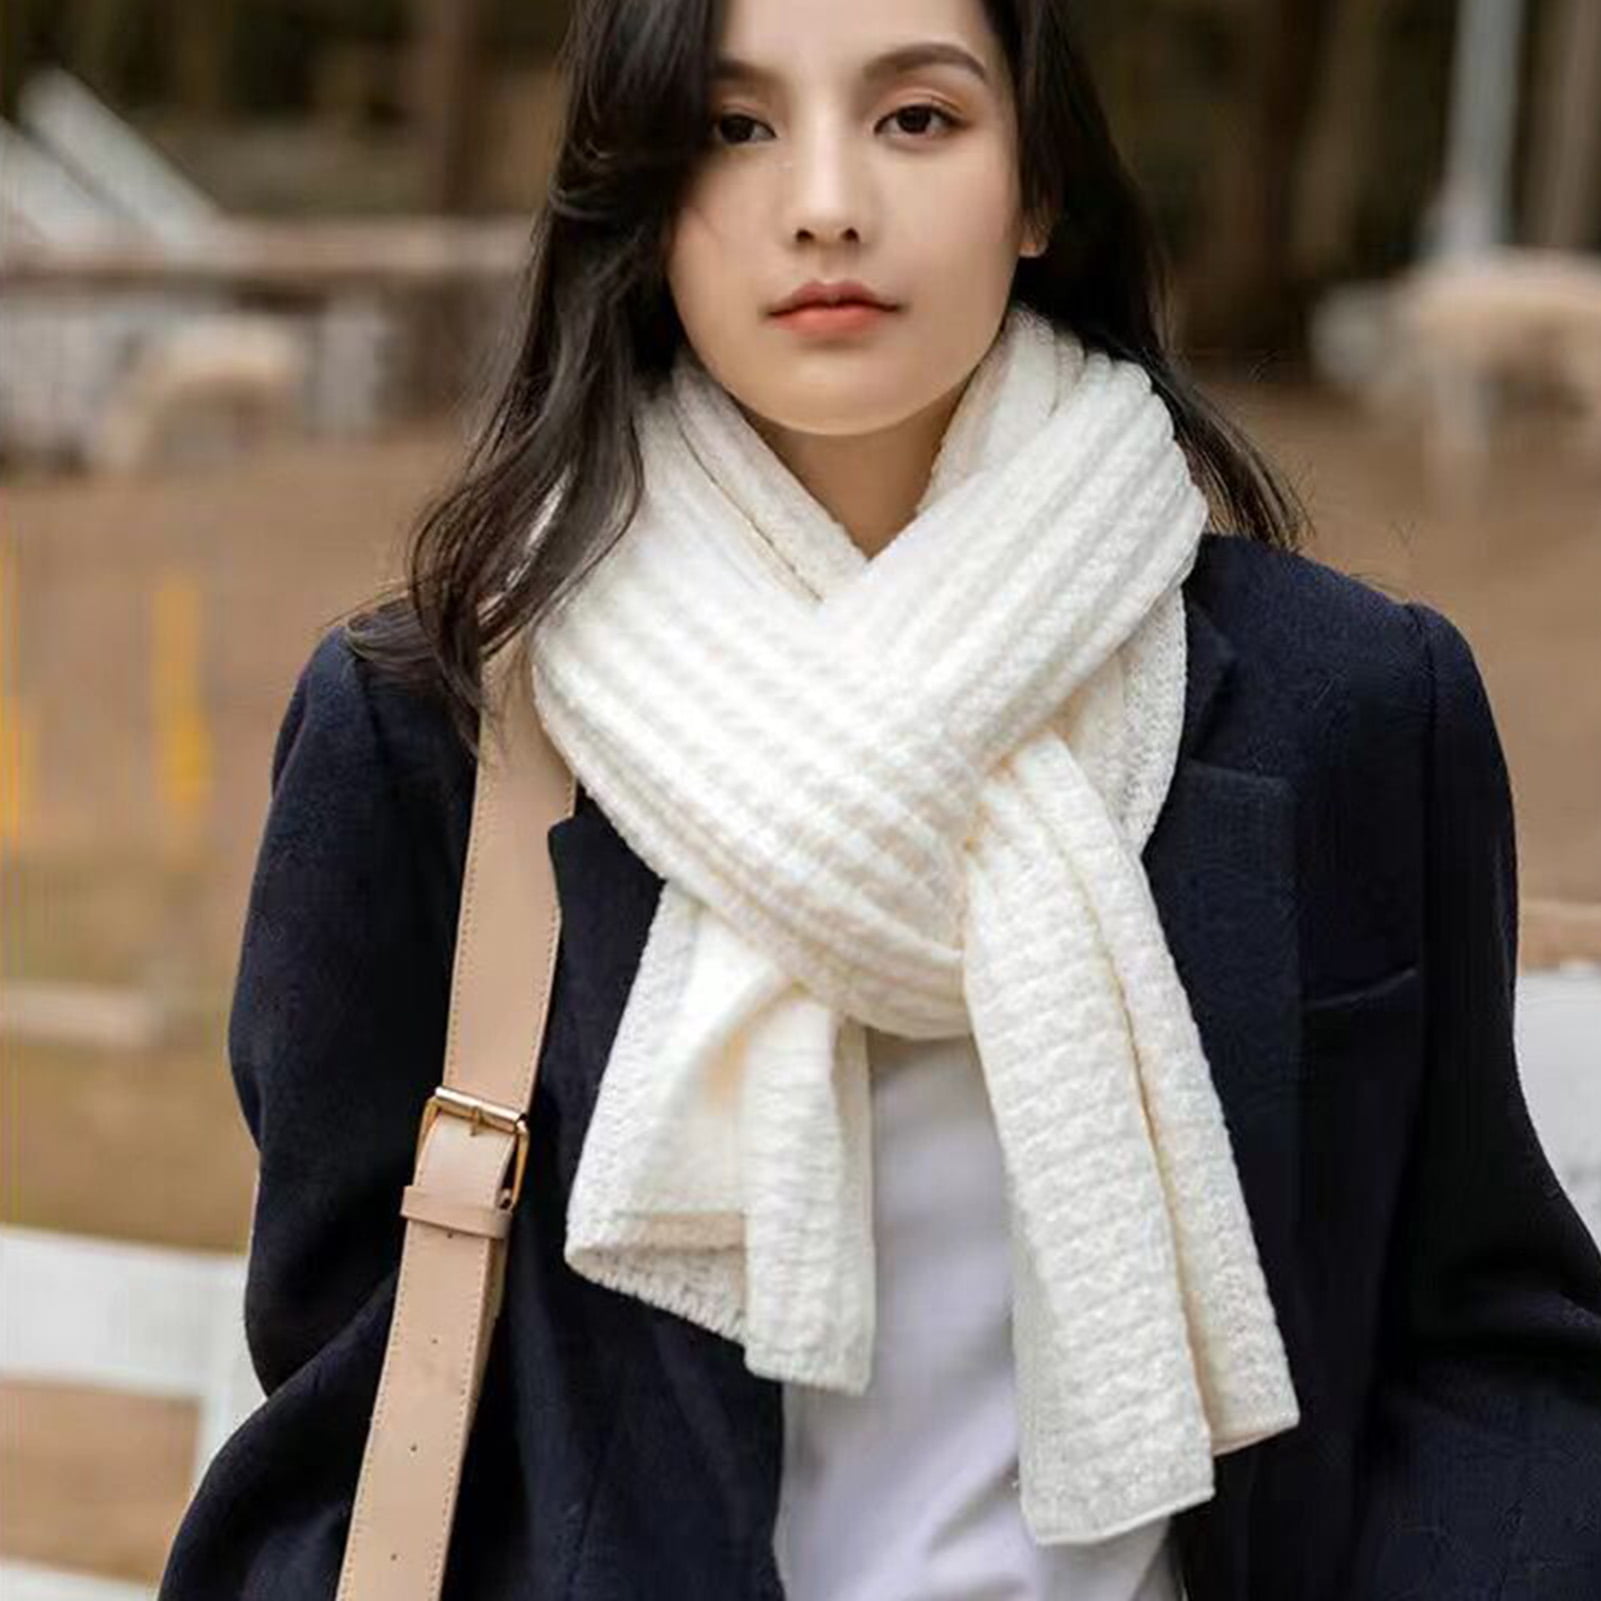 Scarf Cashmere Scarves Sky Blue Woman Winter Scarf Adults Warm Wool Knitted  Scarf Ladies Girls Kids …See more Scarf Cashmere Scarves Sky Blue Woman